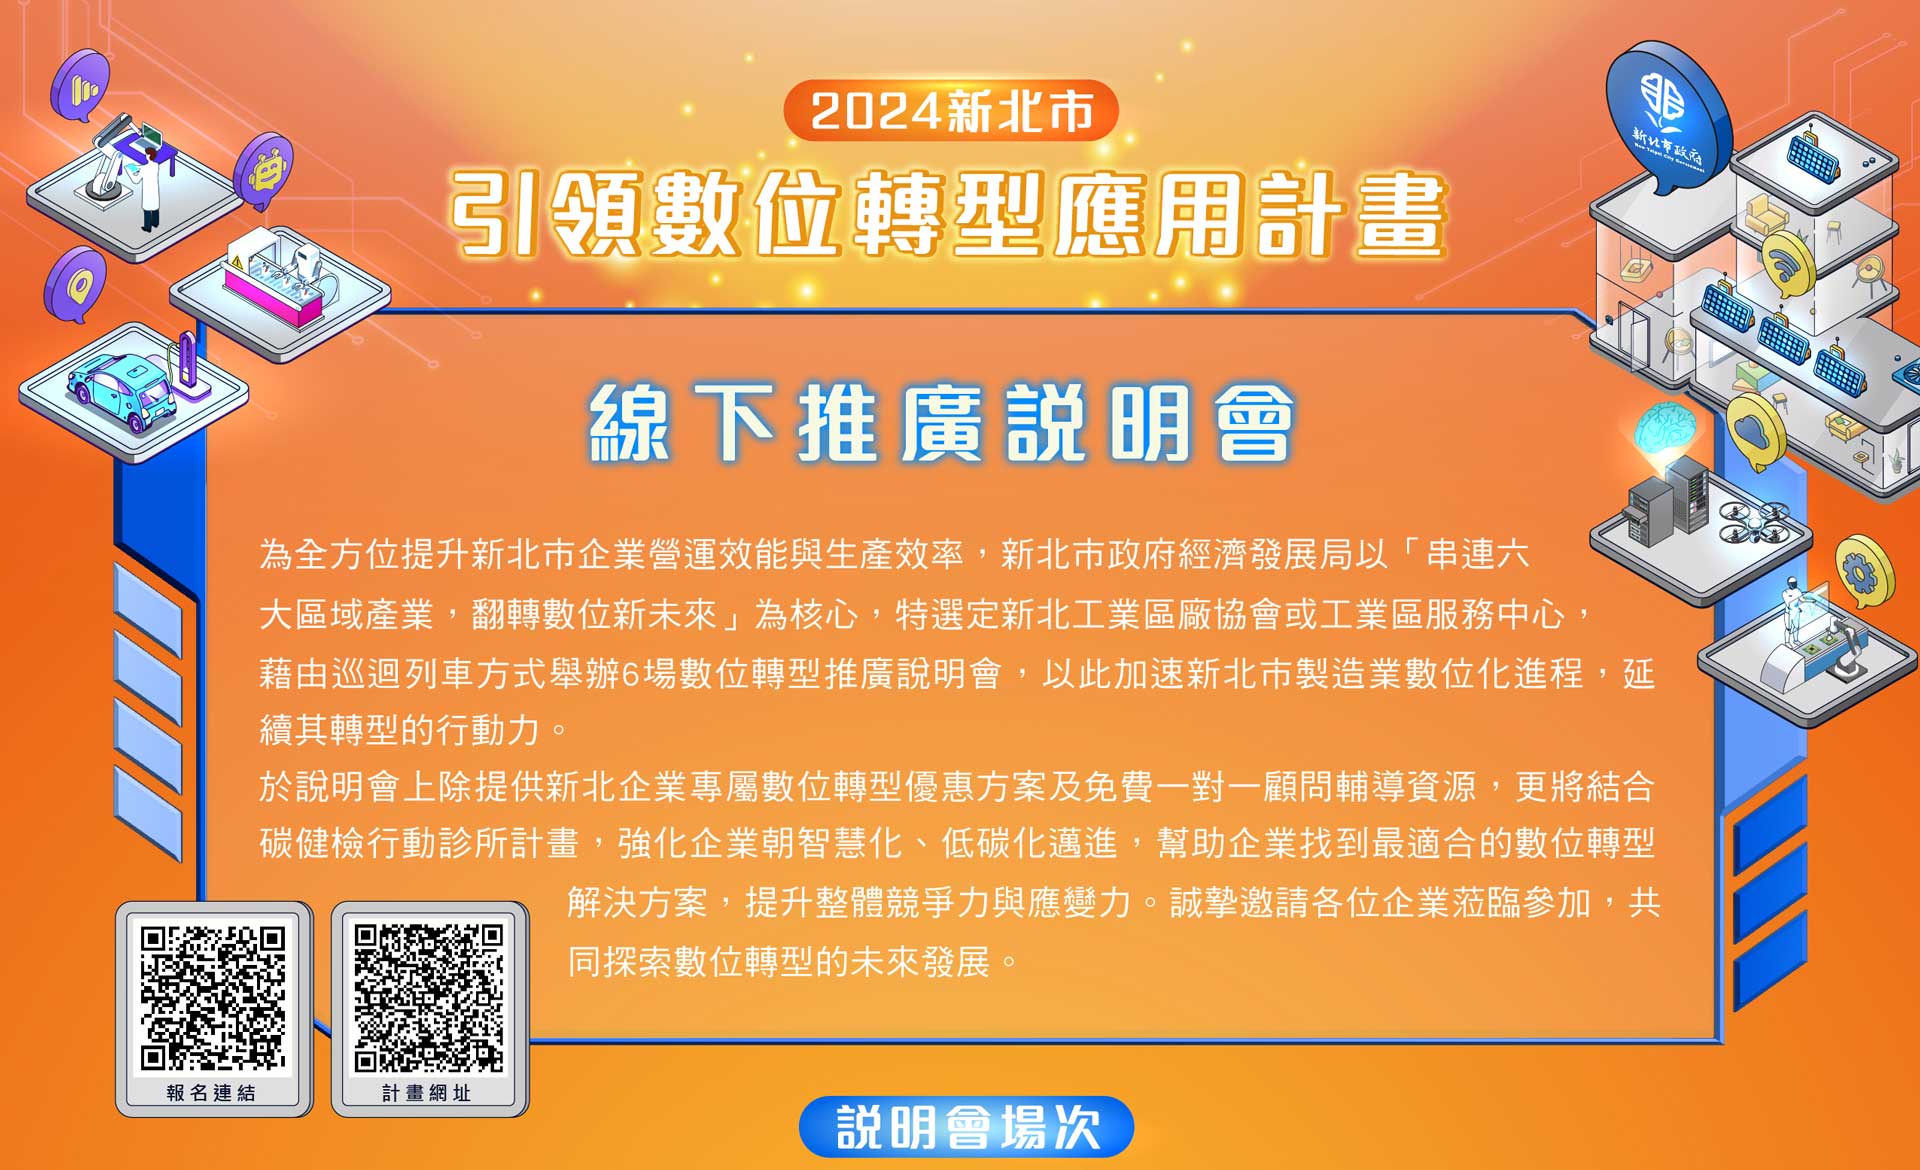 Read more about the article 2024 新北數位轉型計畫，線下推廣說明會